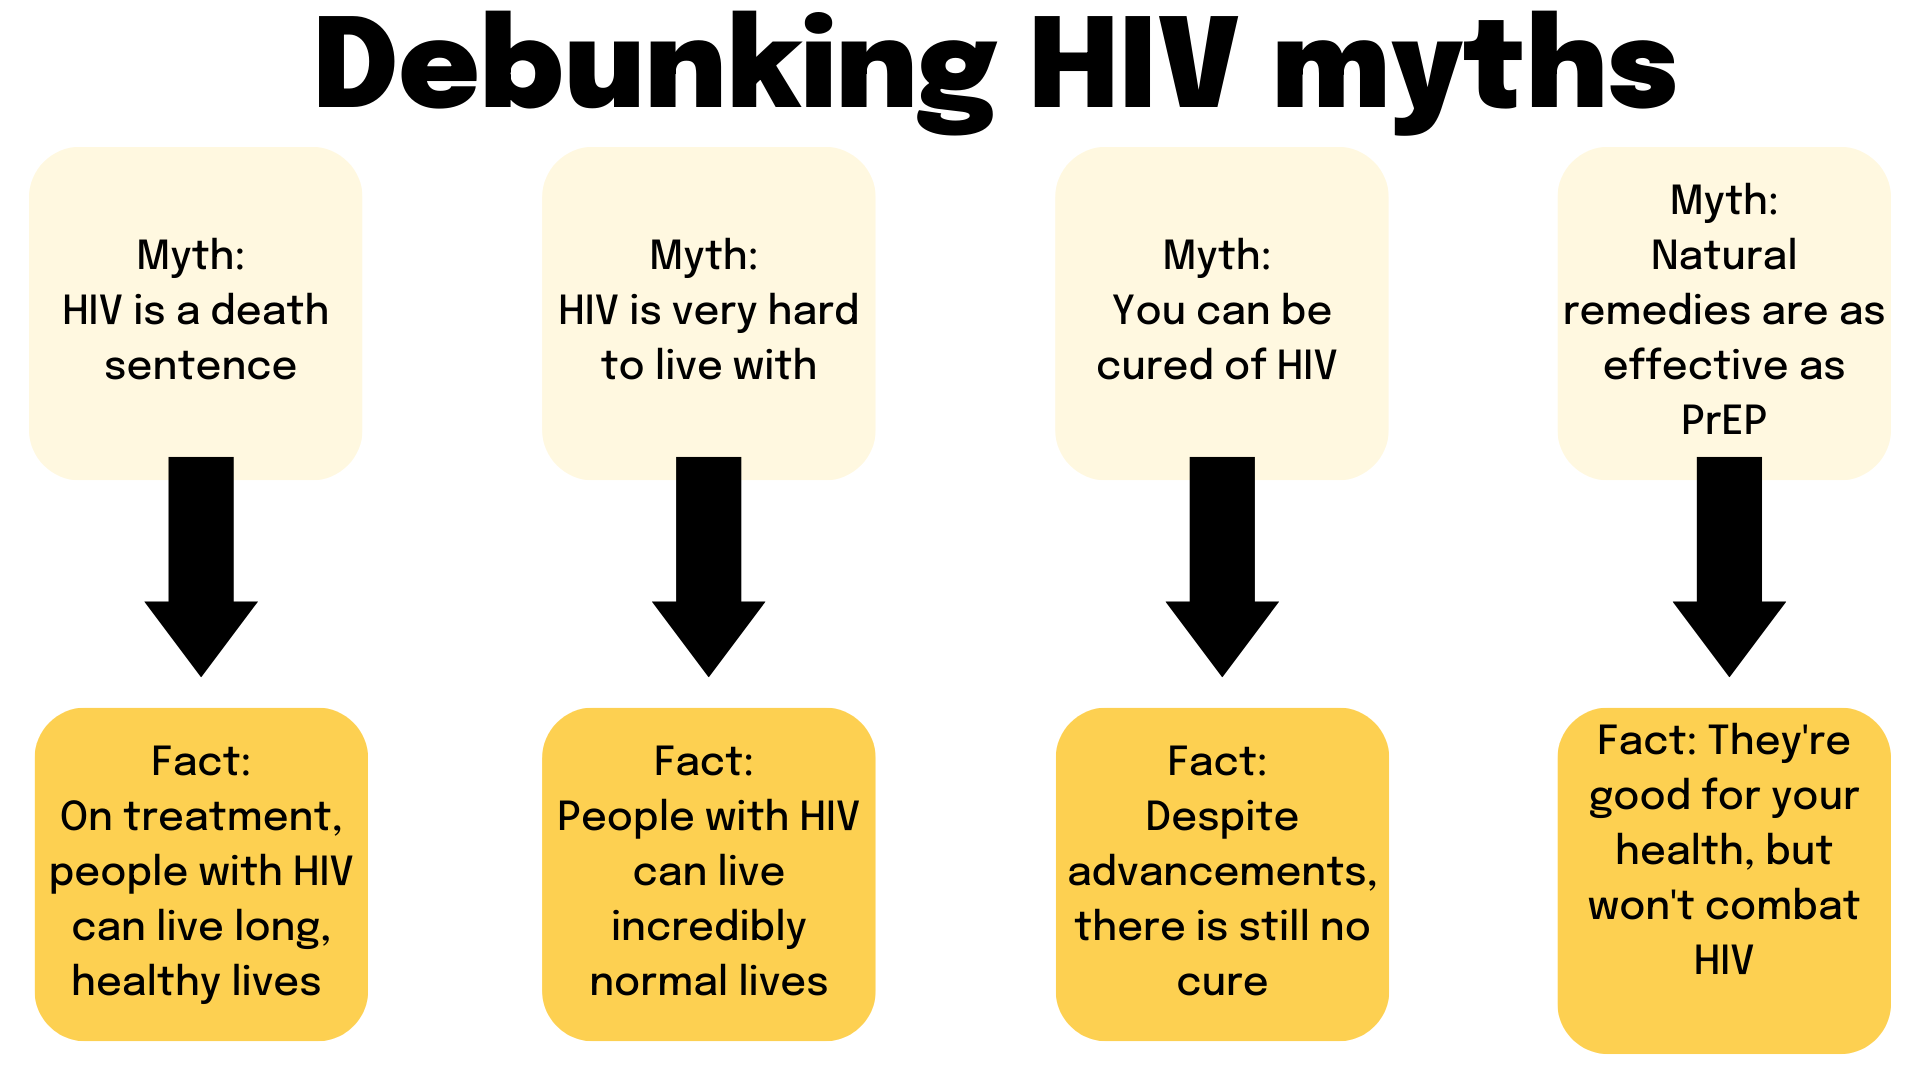 4 boxes showing HIV myths and facts